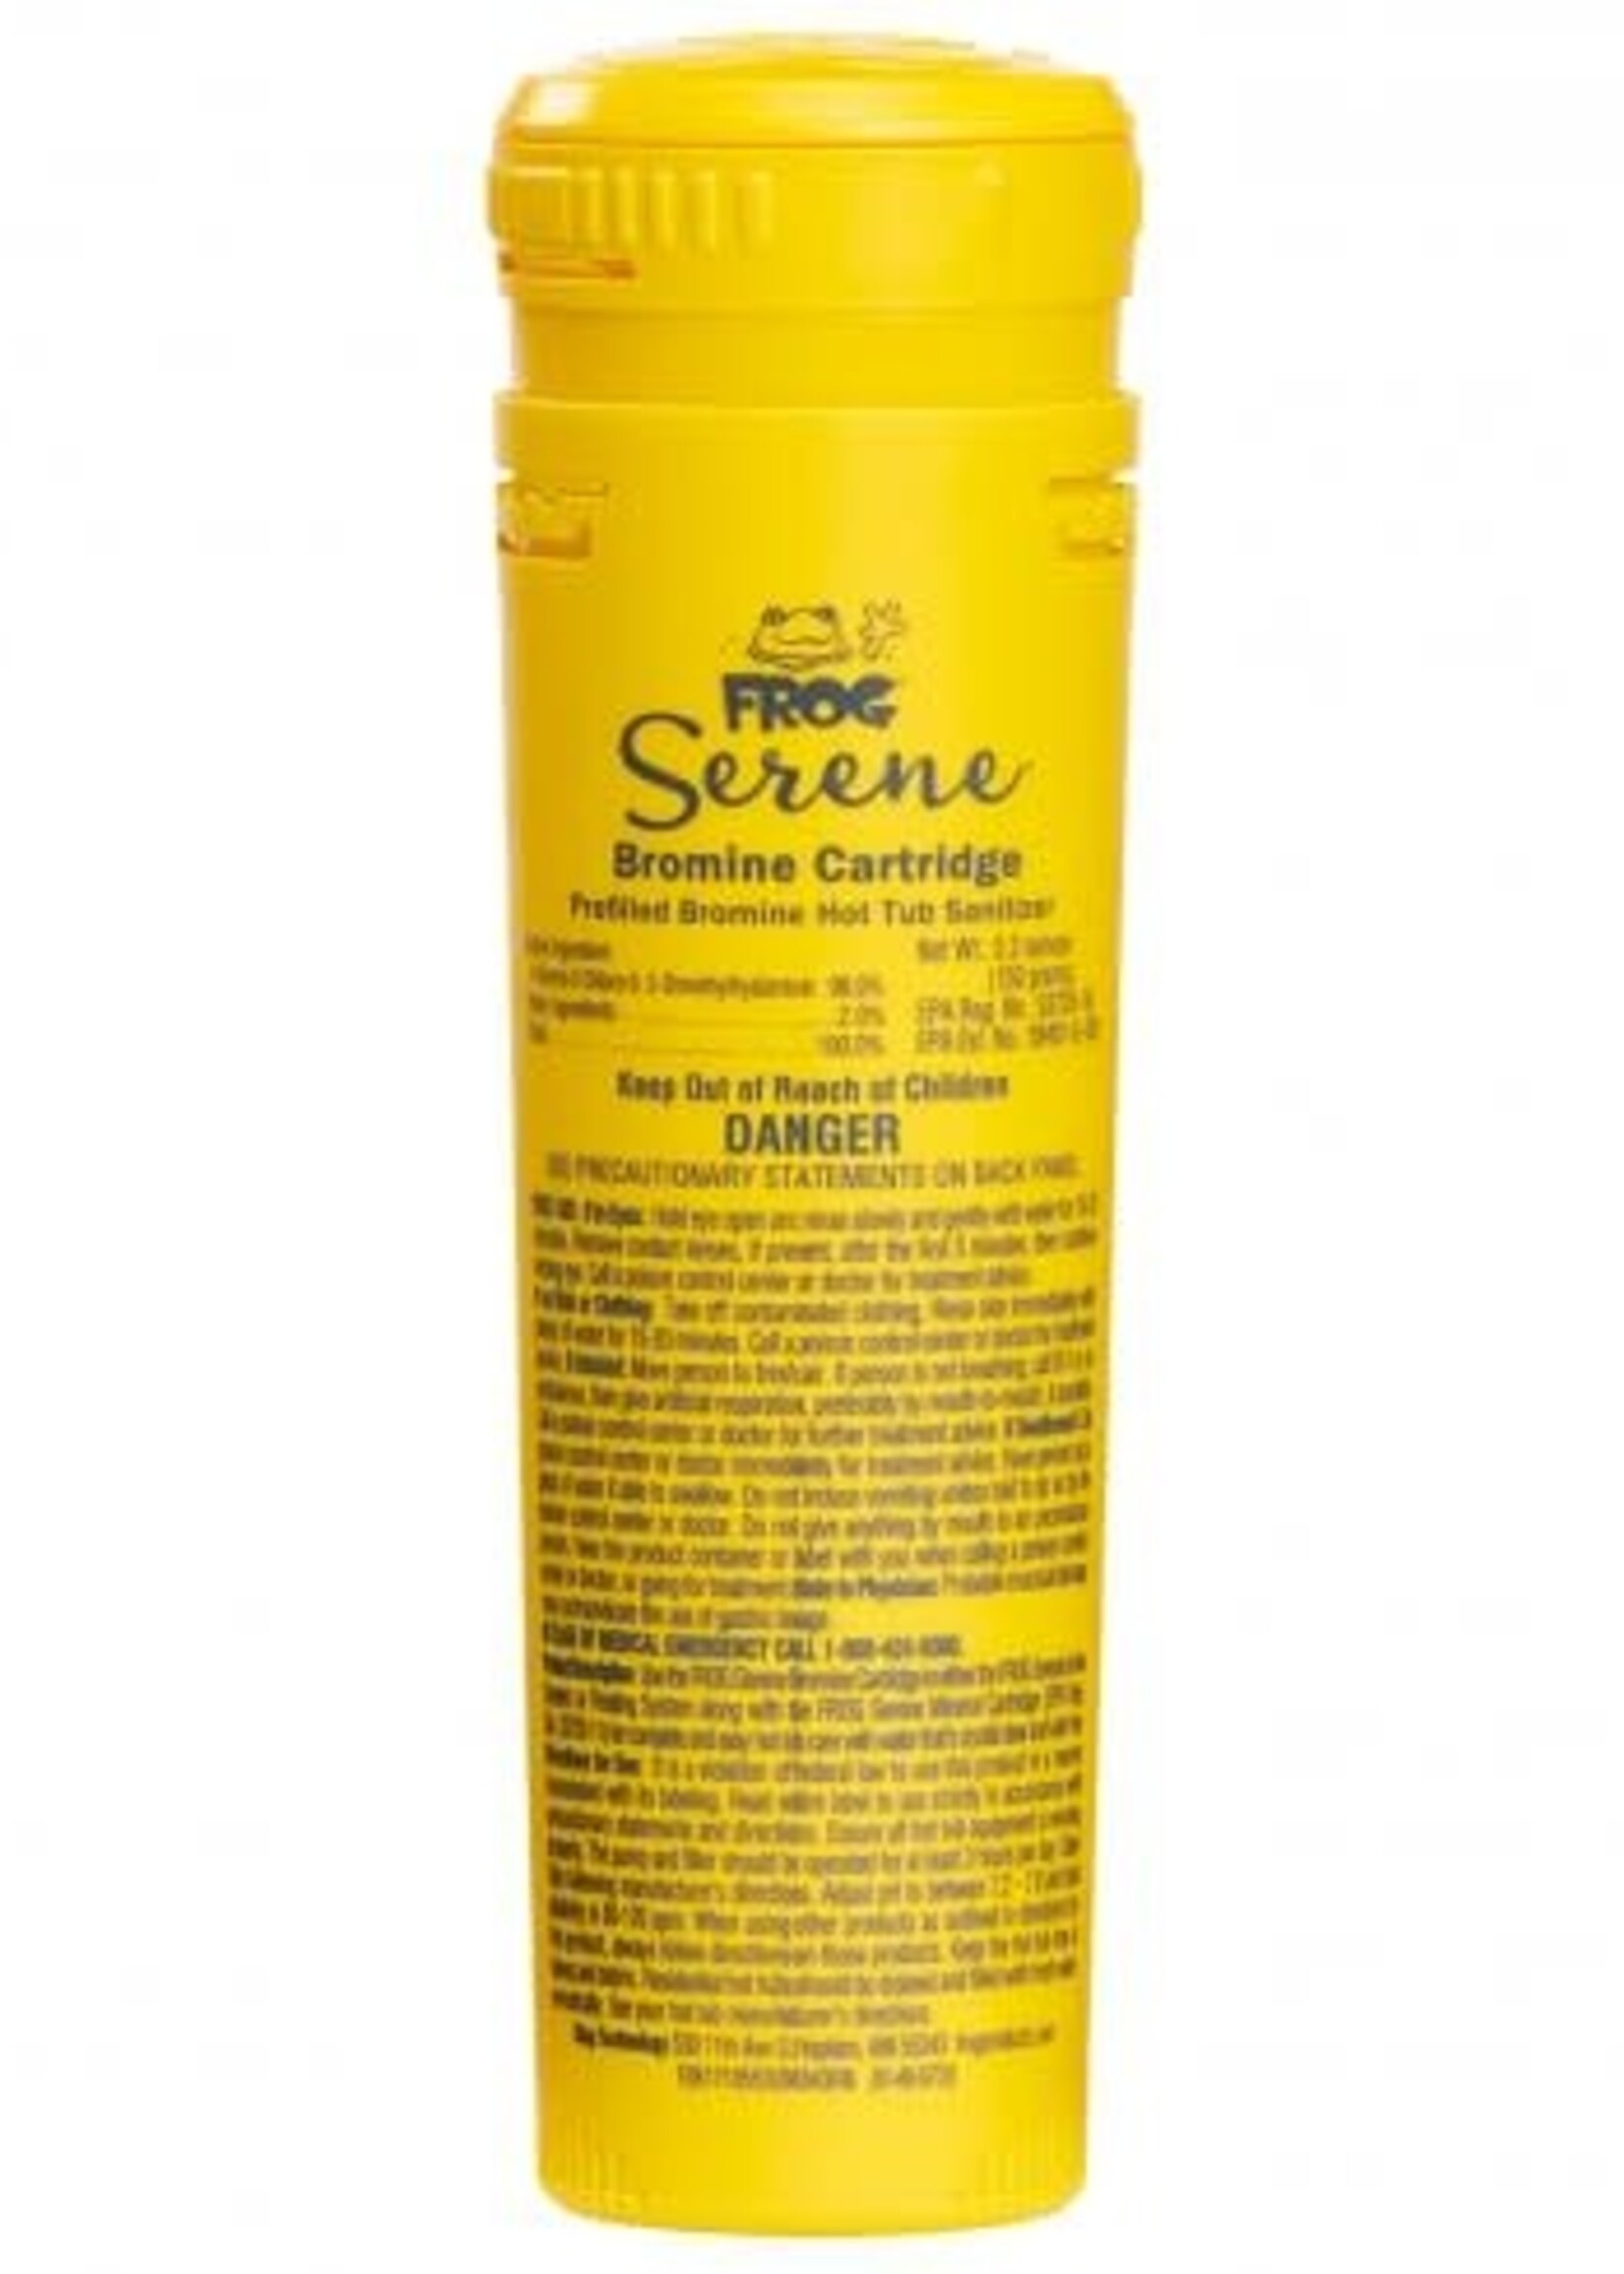 @Ease Frog  @Ease In-Line Serene Bromine Cartridge (Single Yellow)